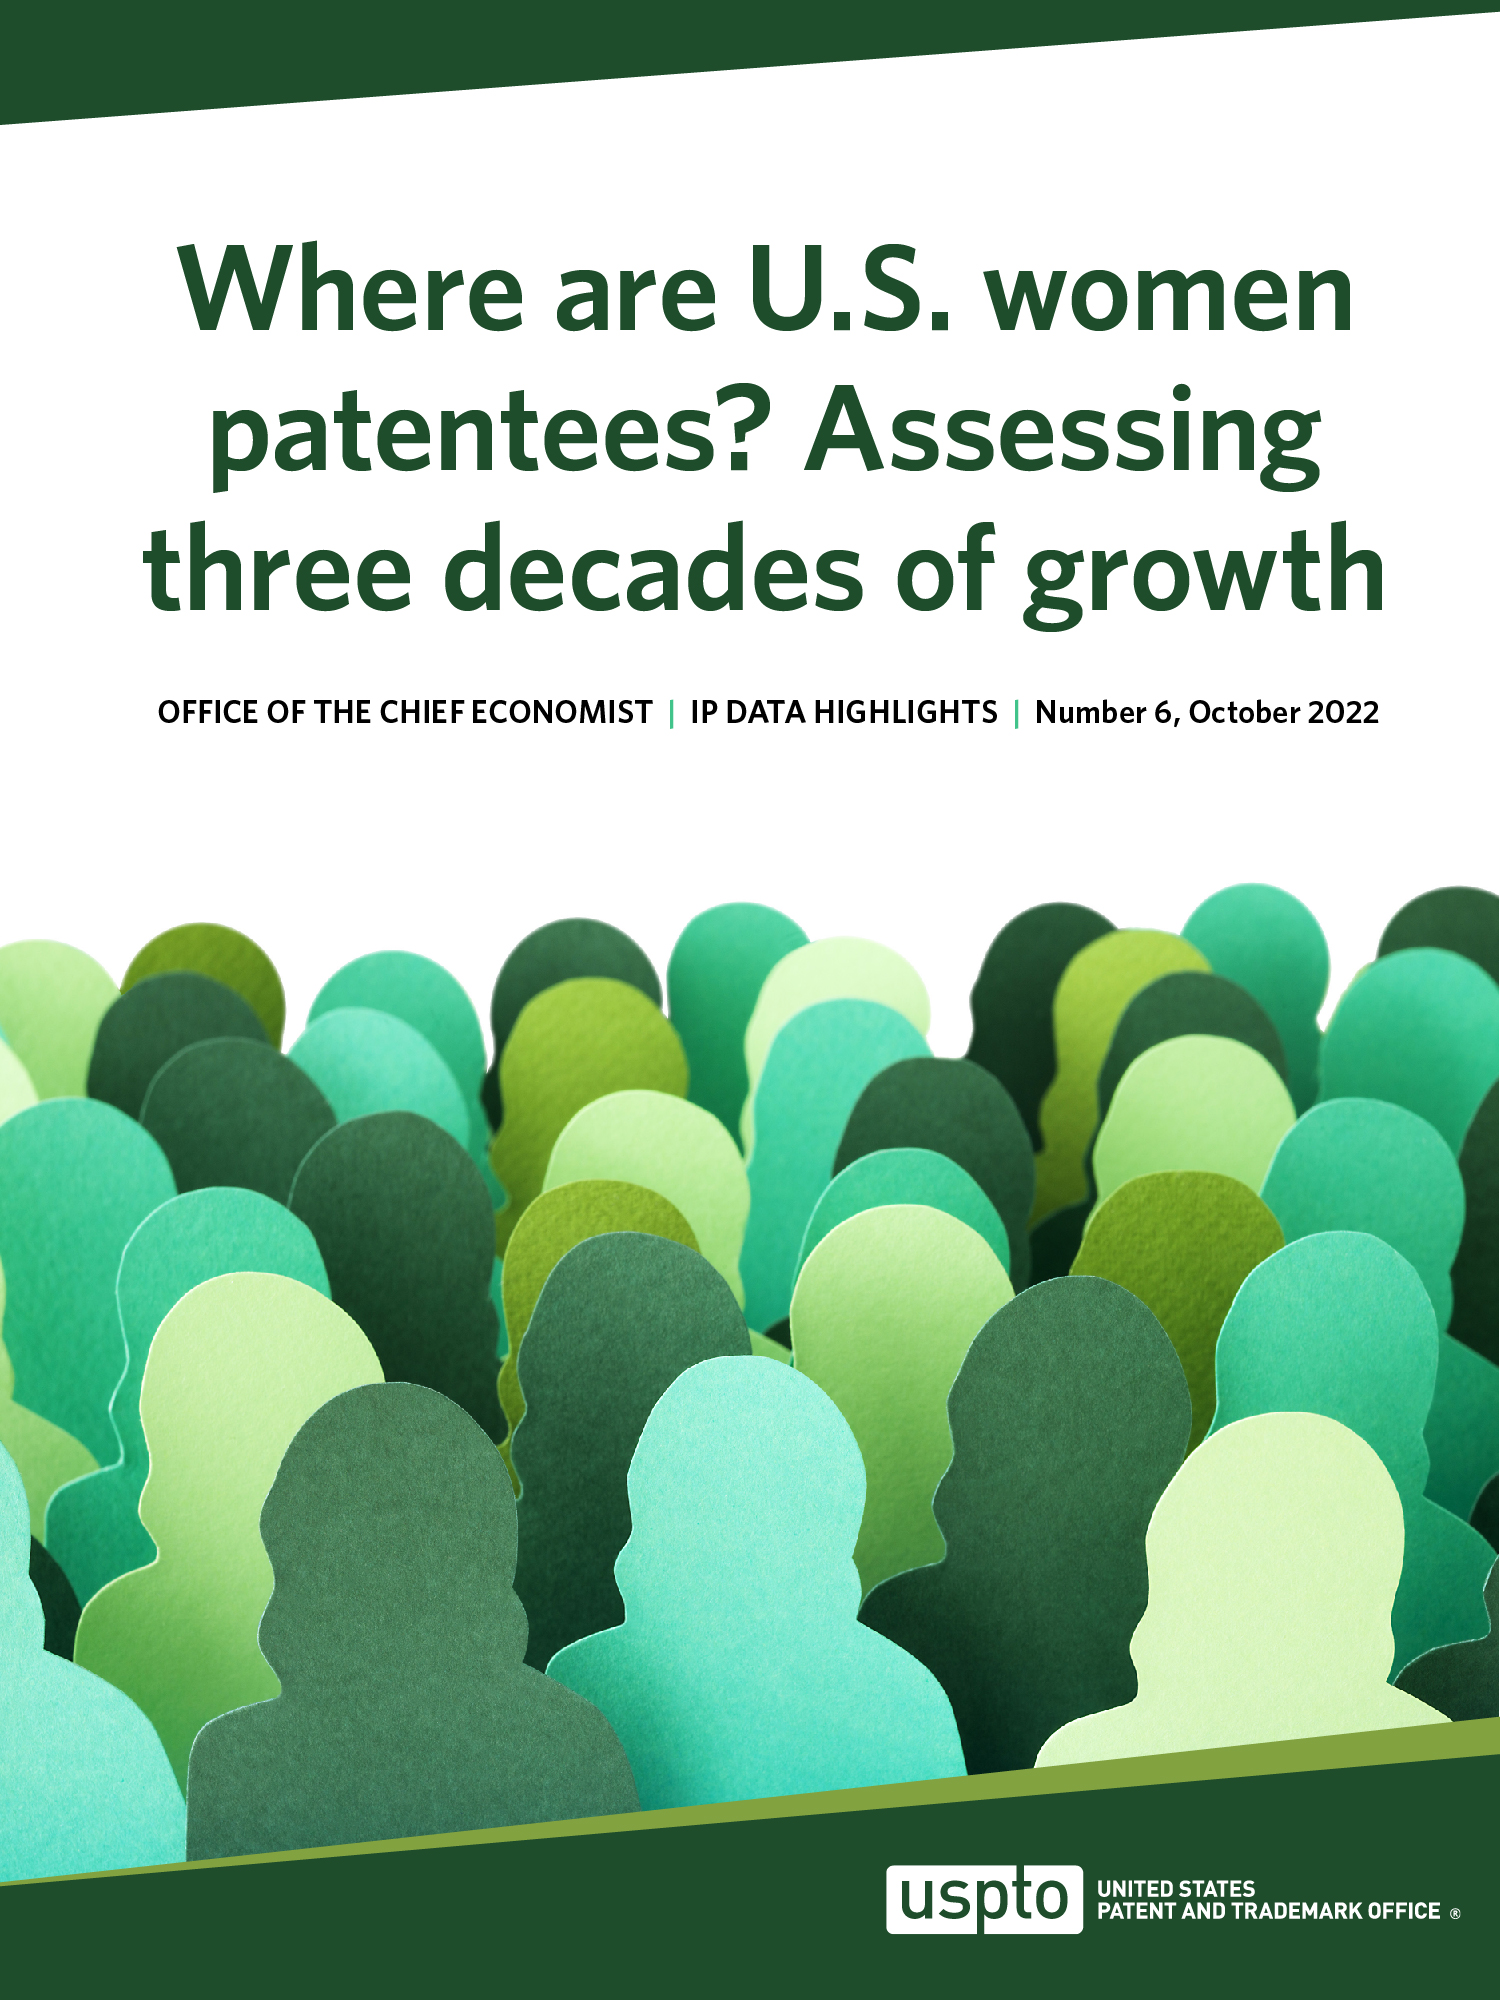 Where are U.S. women patentees? Assessing three decades of growth